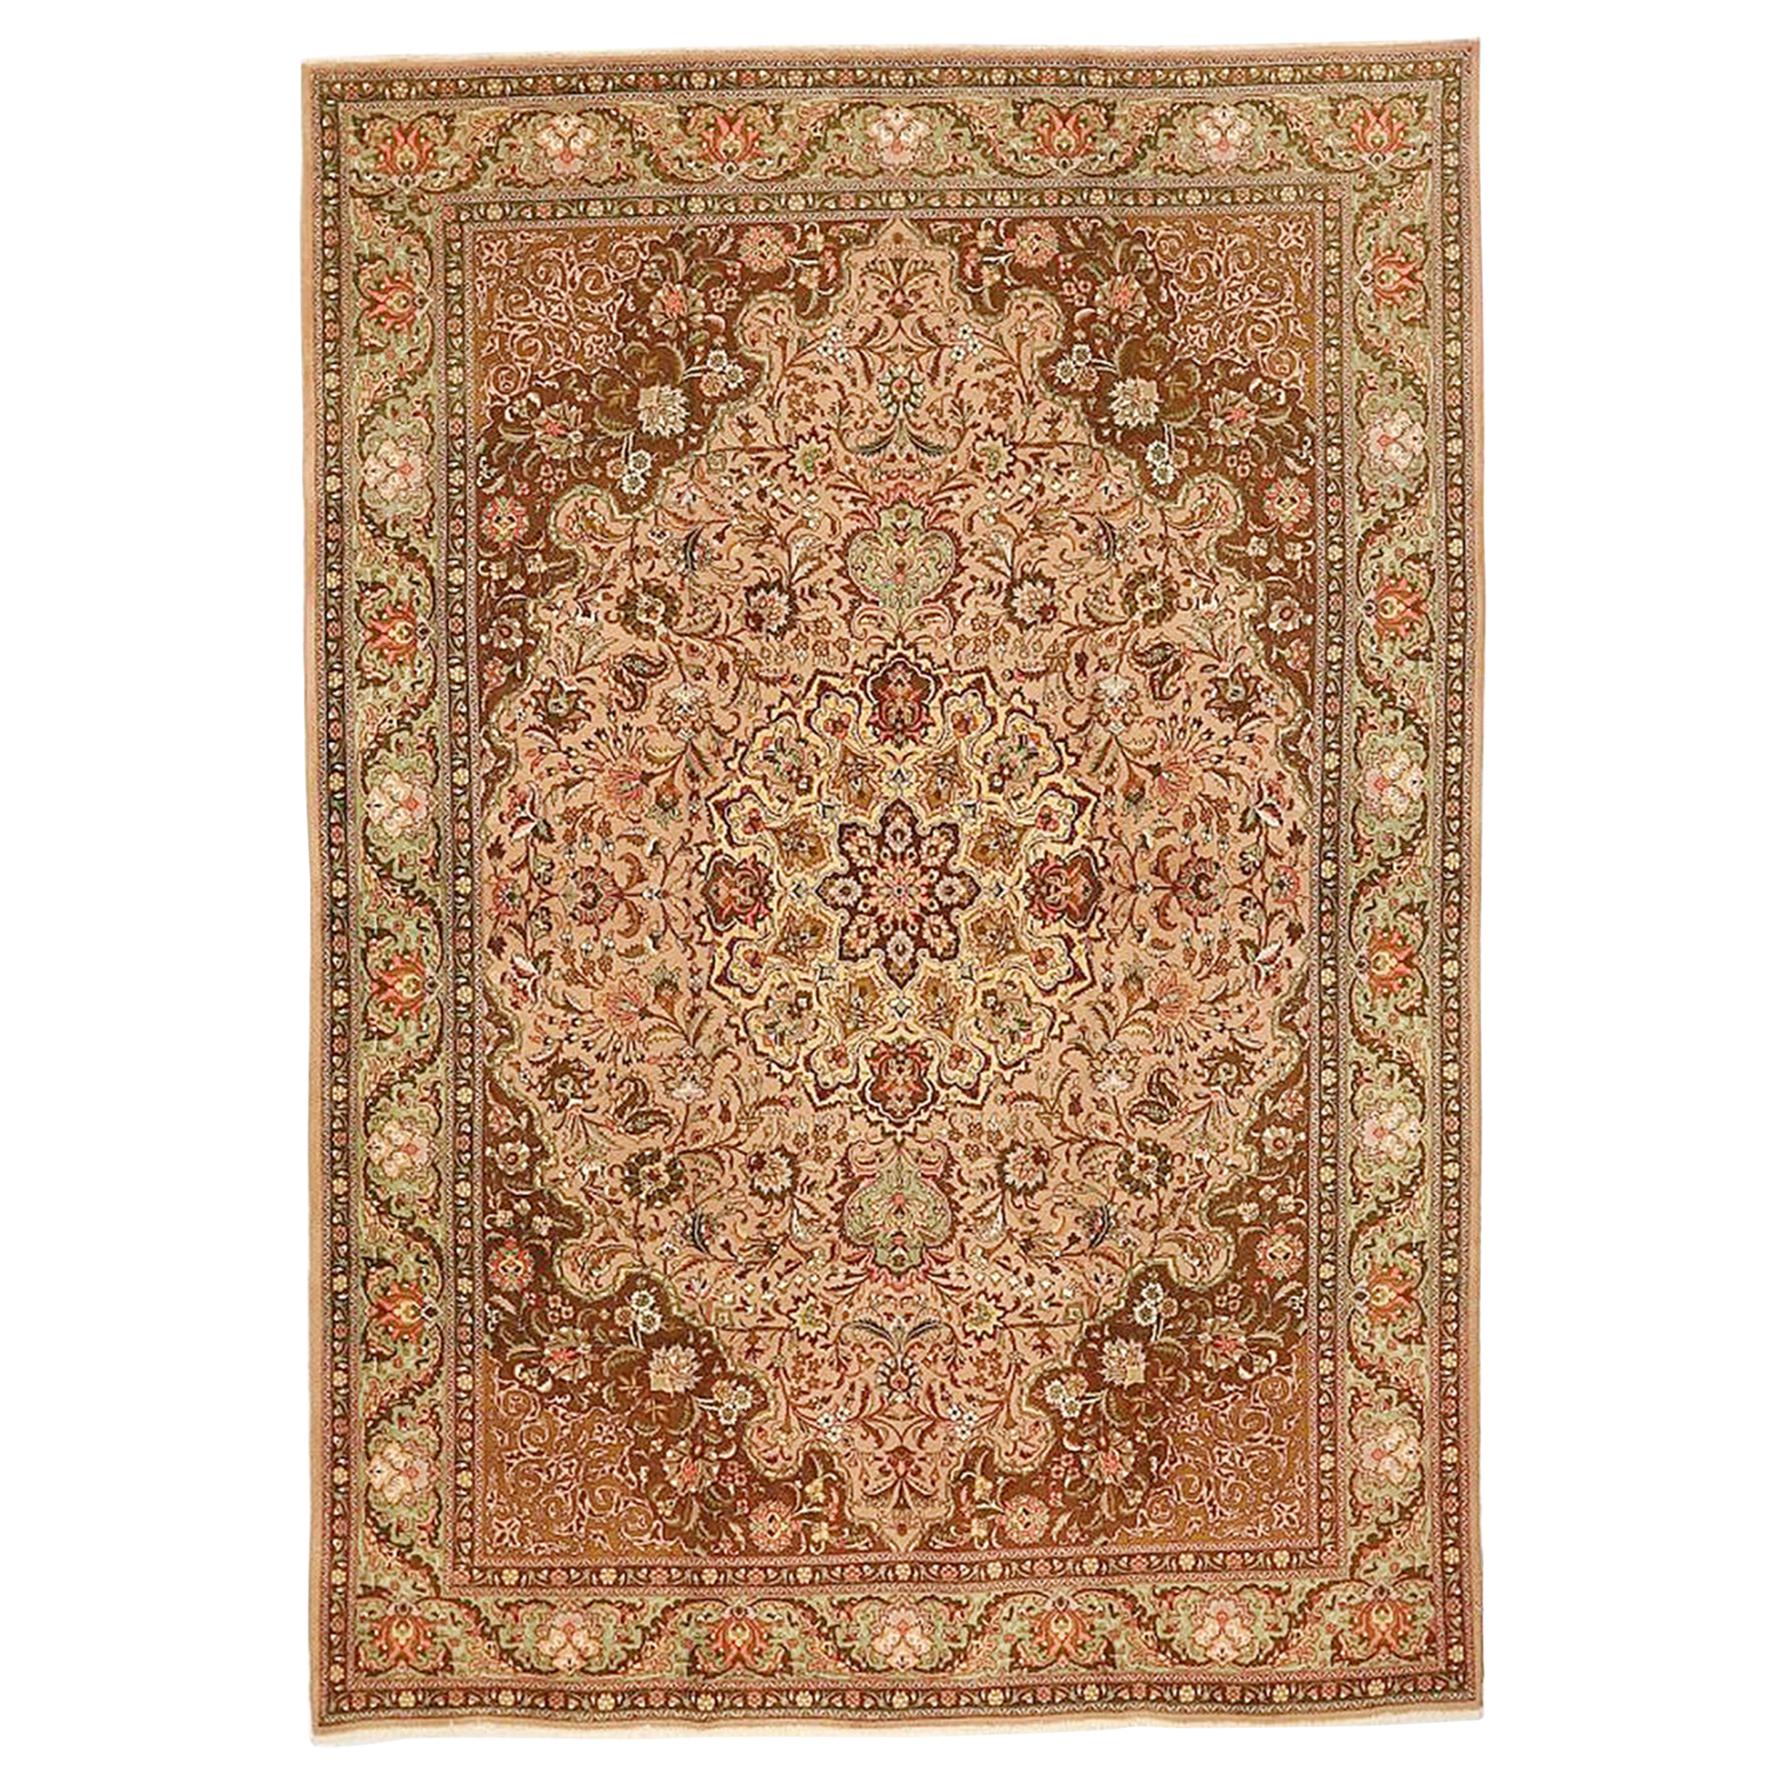 1930 Antique Tabriz Rug with Pink and Brown Flower Details on Ivory Field For Sale